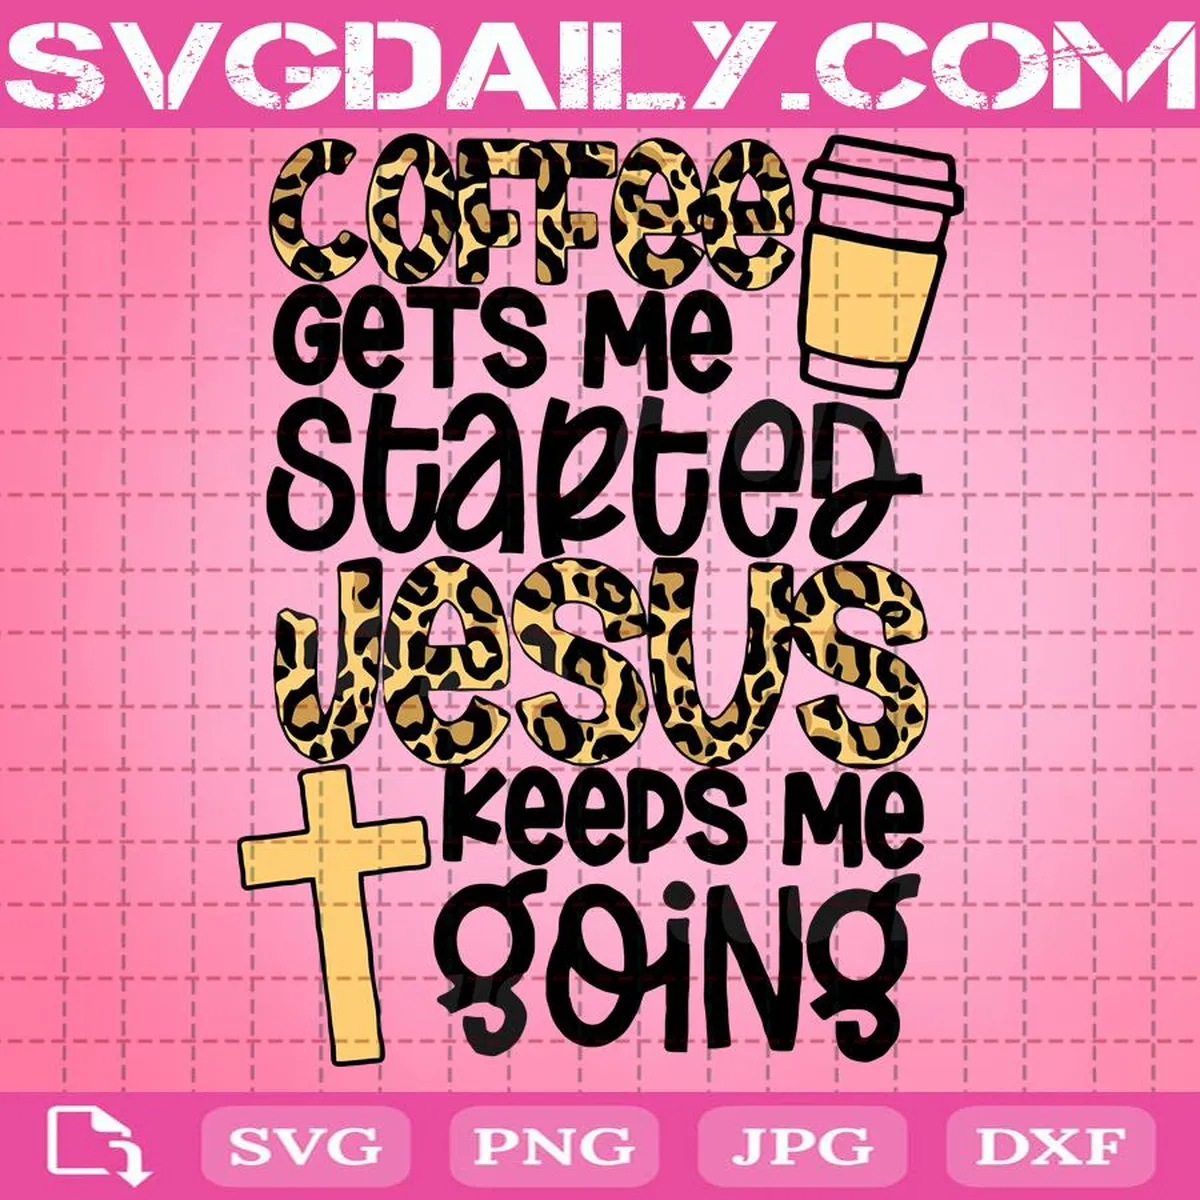 Coffee Gets Me Started Jesus Keeps Me Going Leopard Svg, Coffee Svg, Jesus Svg, Love Coffee Svg, Jesus Gift Svg, Jesus And Coffee Svg